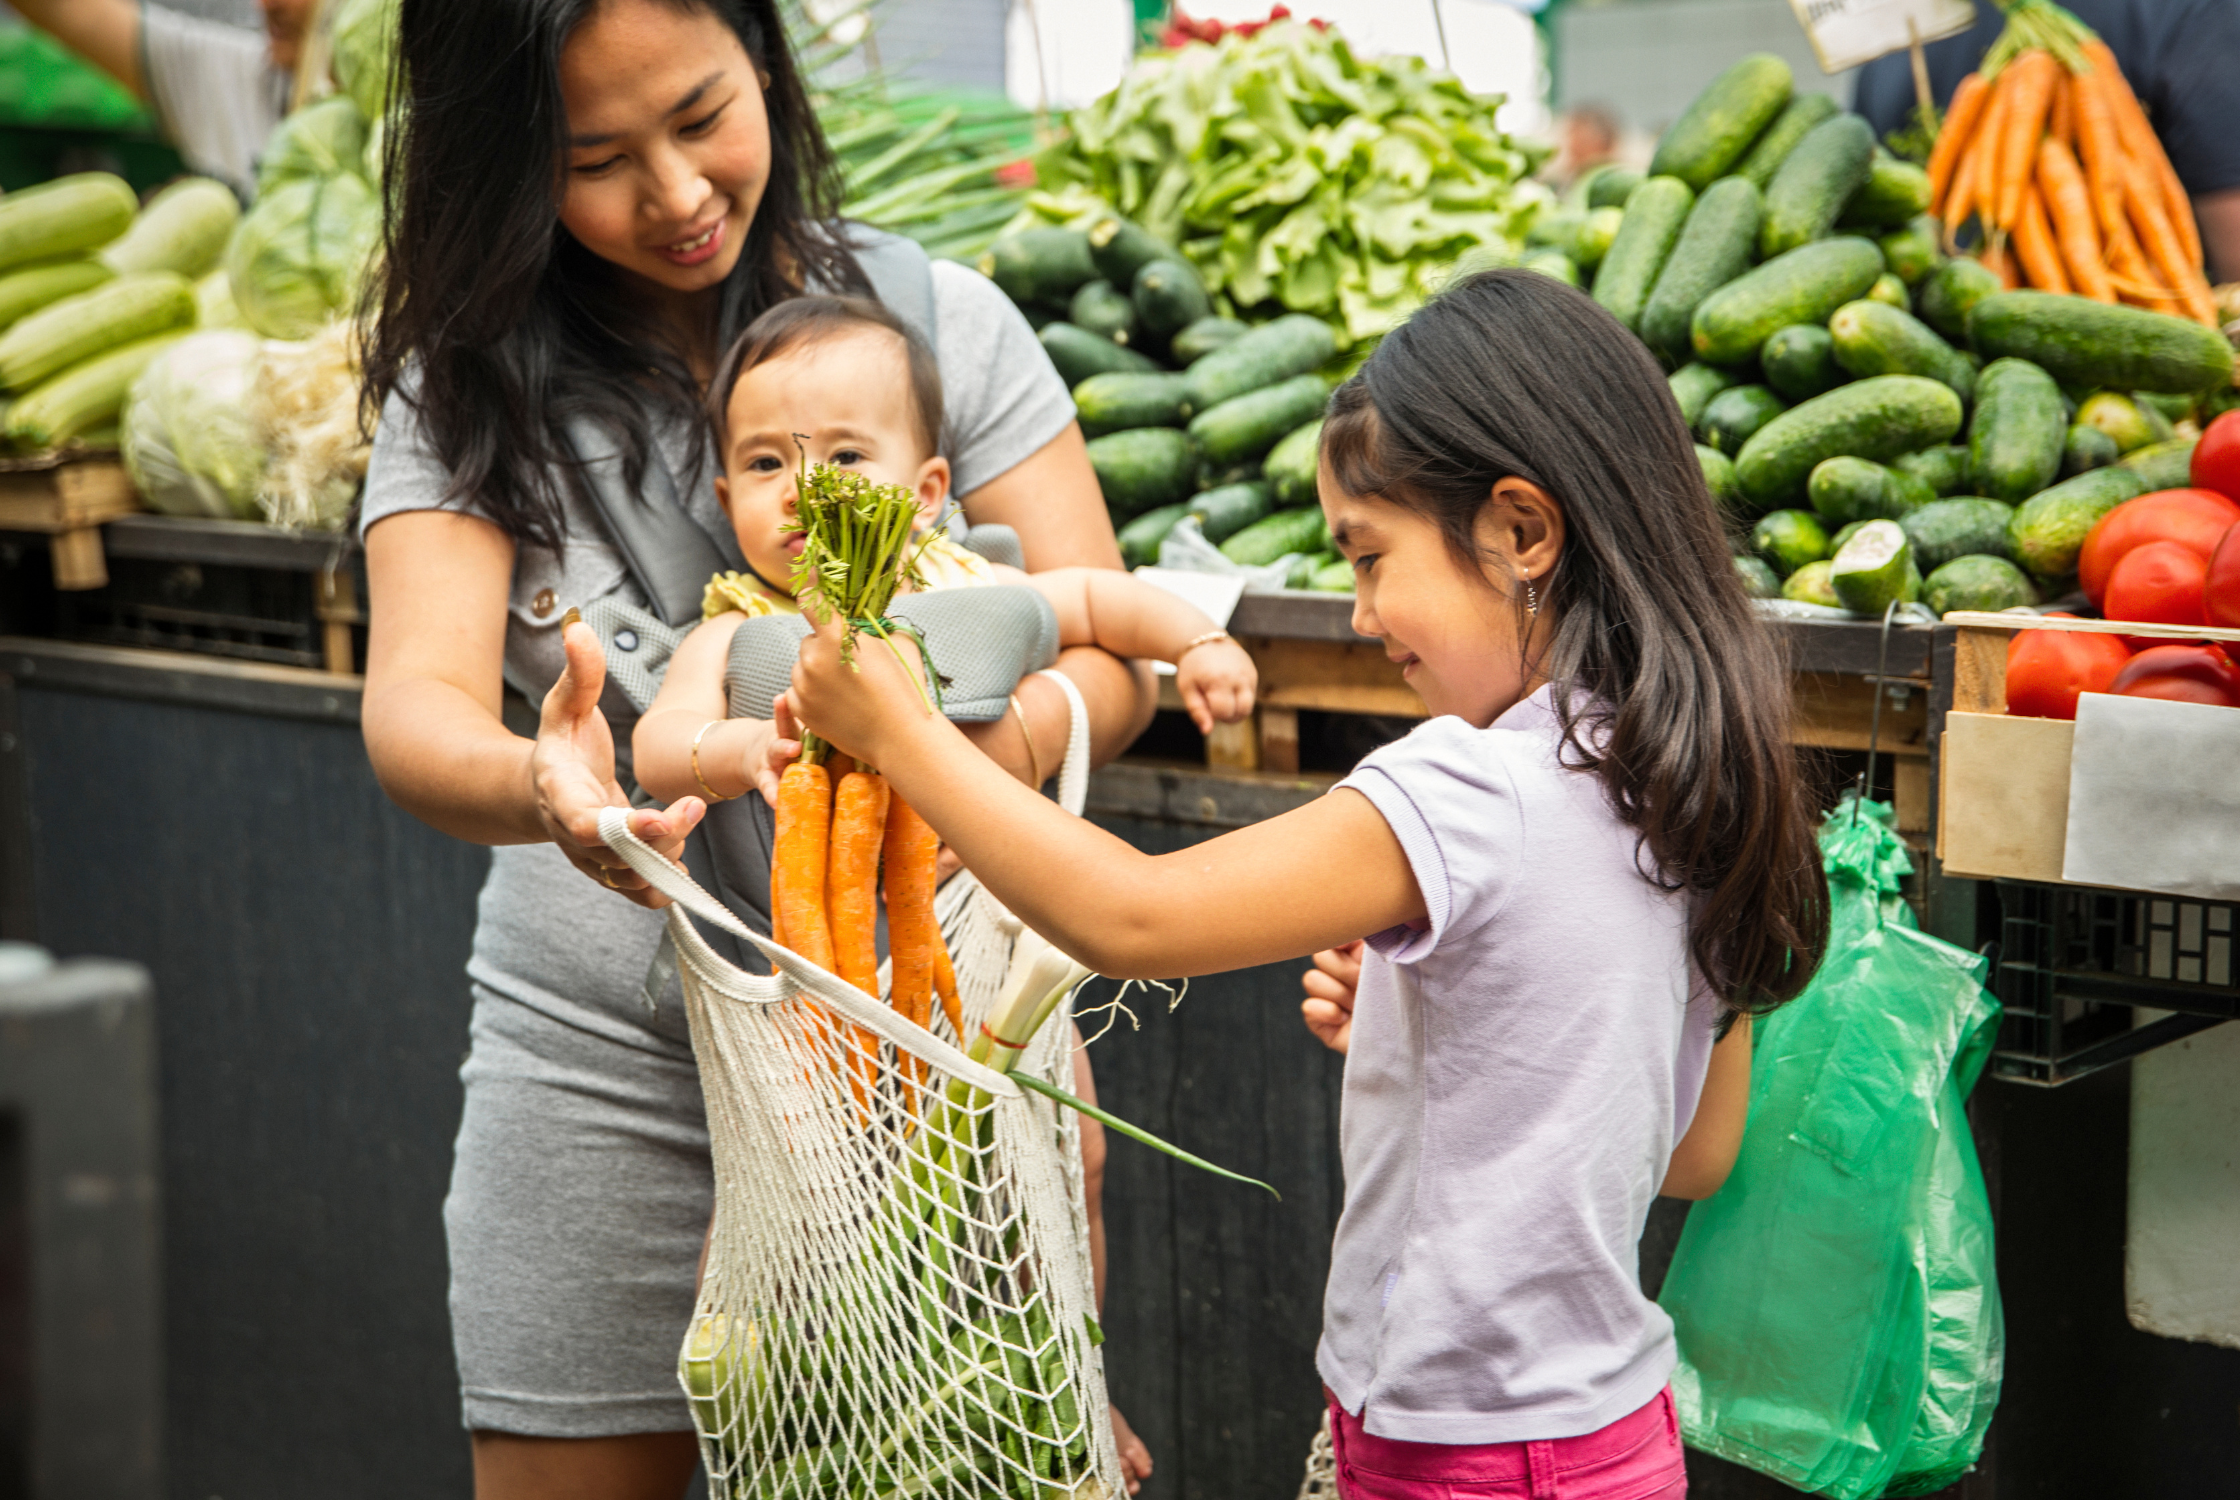 10 Important Tips For When You’re Grocery Shopping for Kids, From a Dietitian